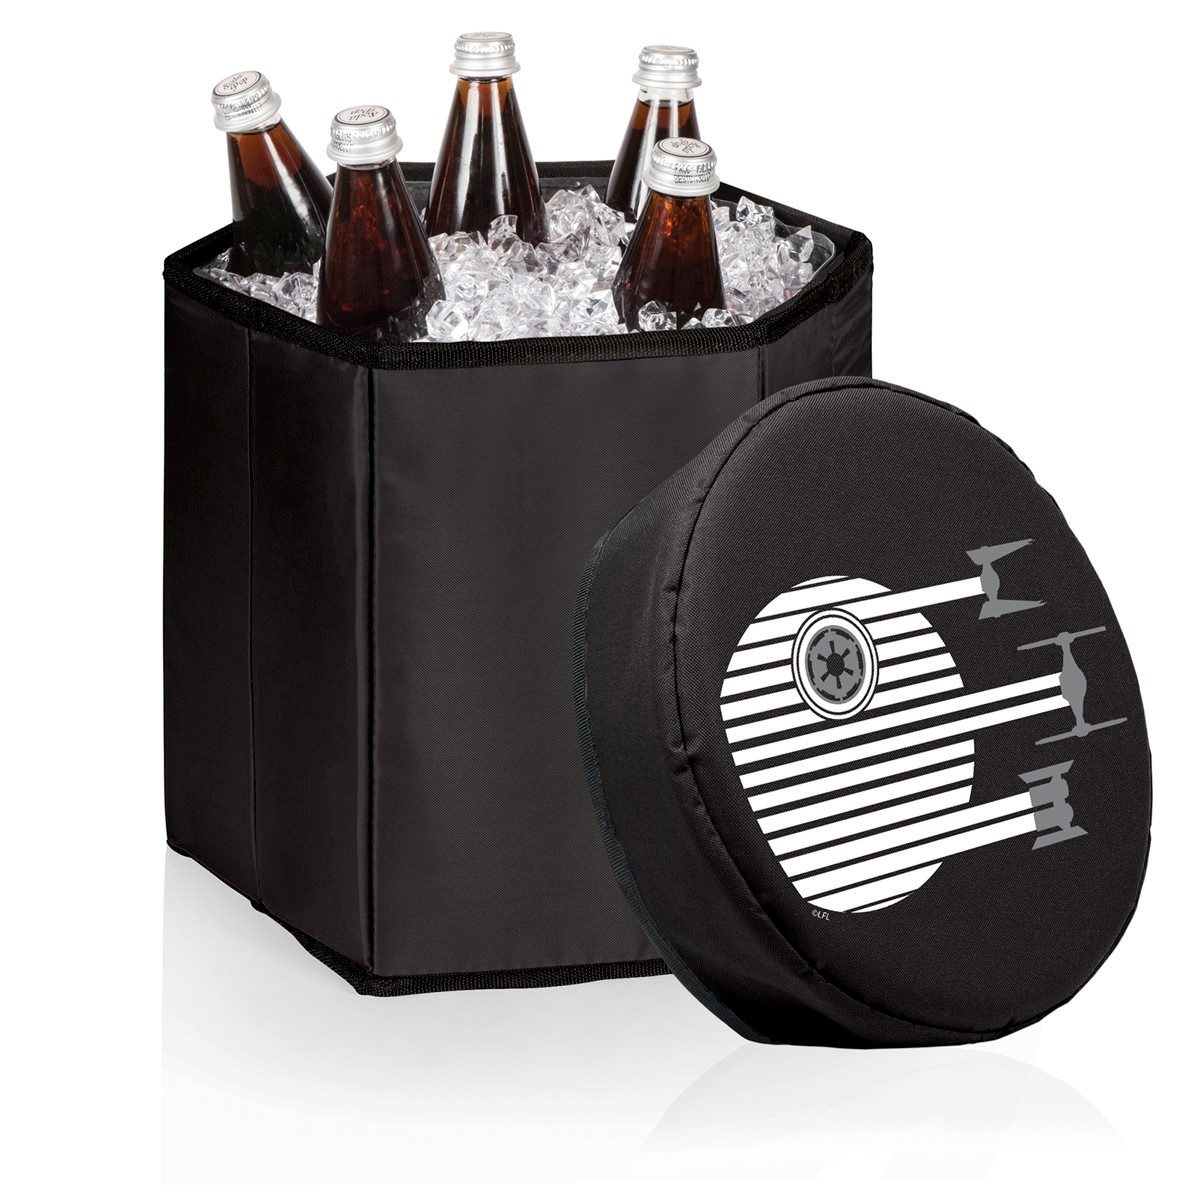 Star Wars Death Star Bongo Seat and Portable Cooler